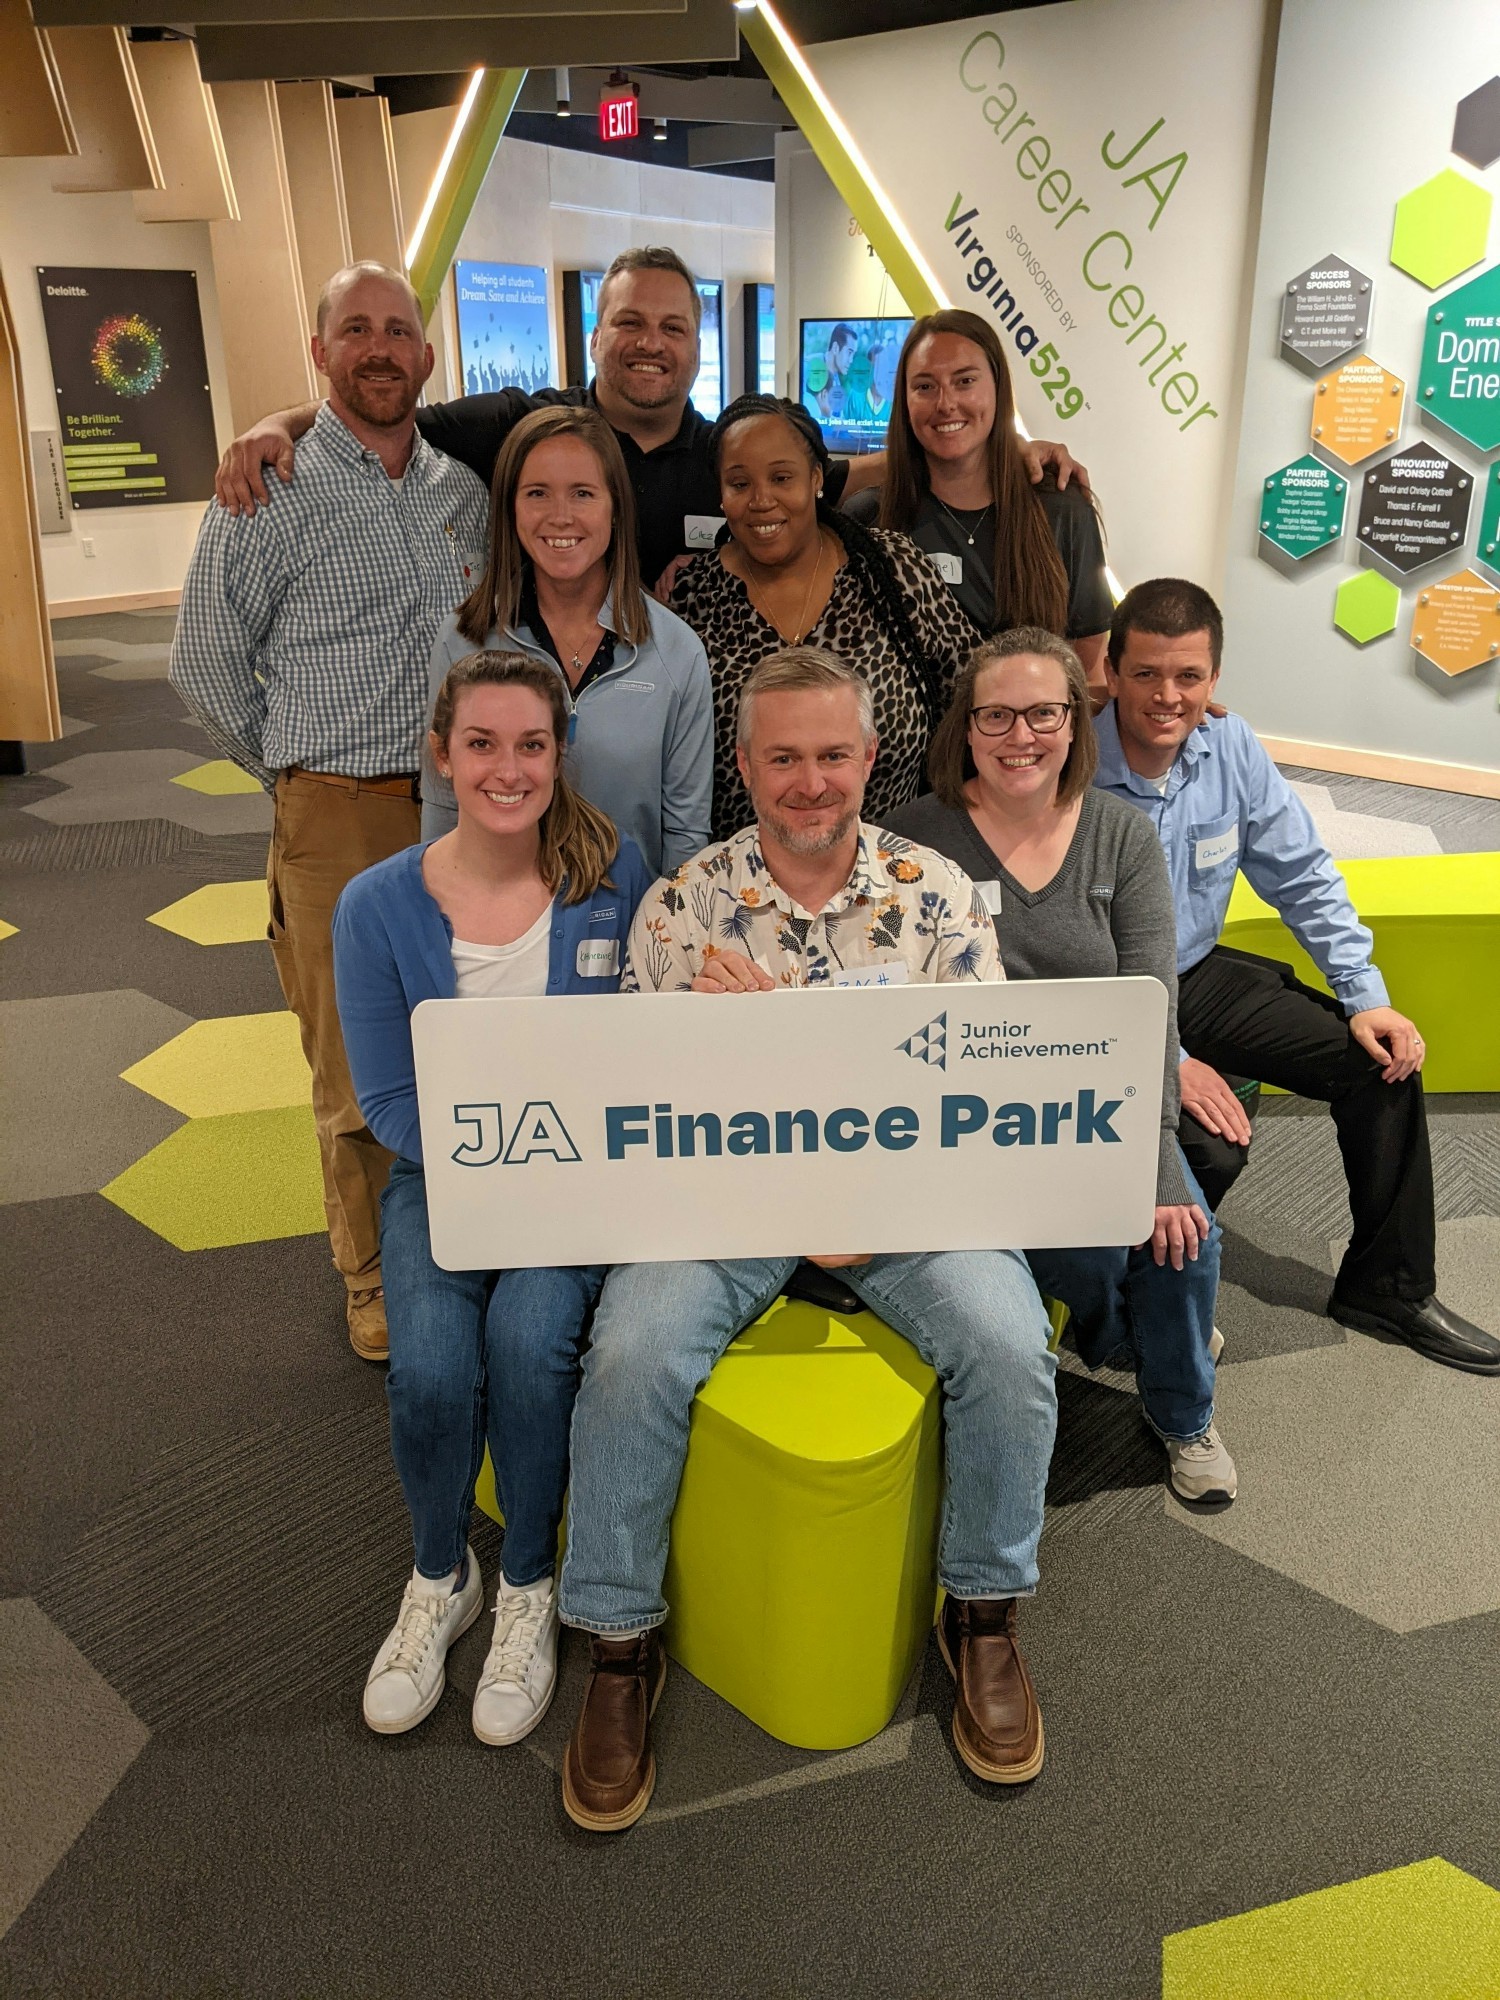 A group of alumni from our Hourigan Leader program spent their day volunteering at JA Finance Park.